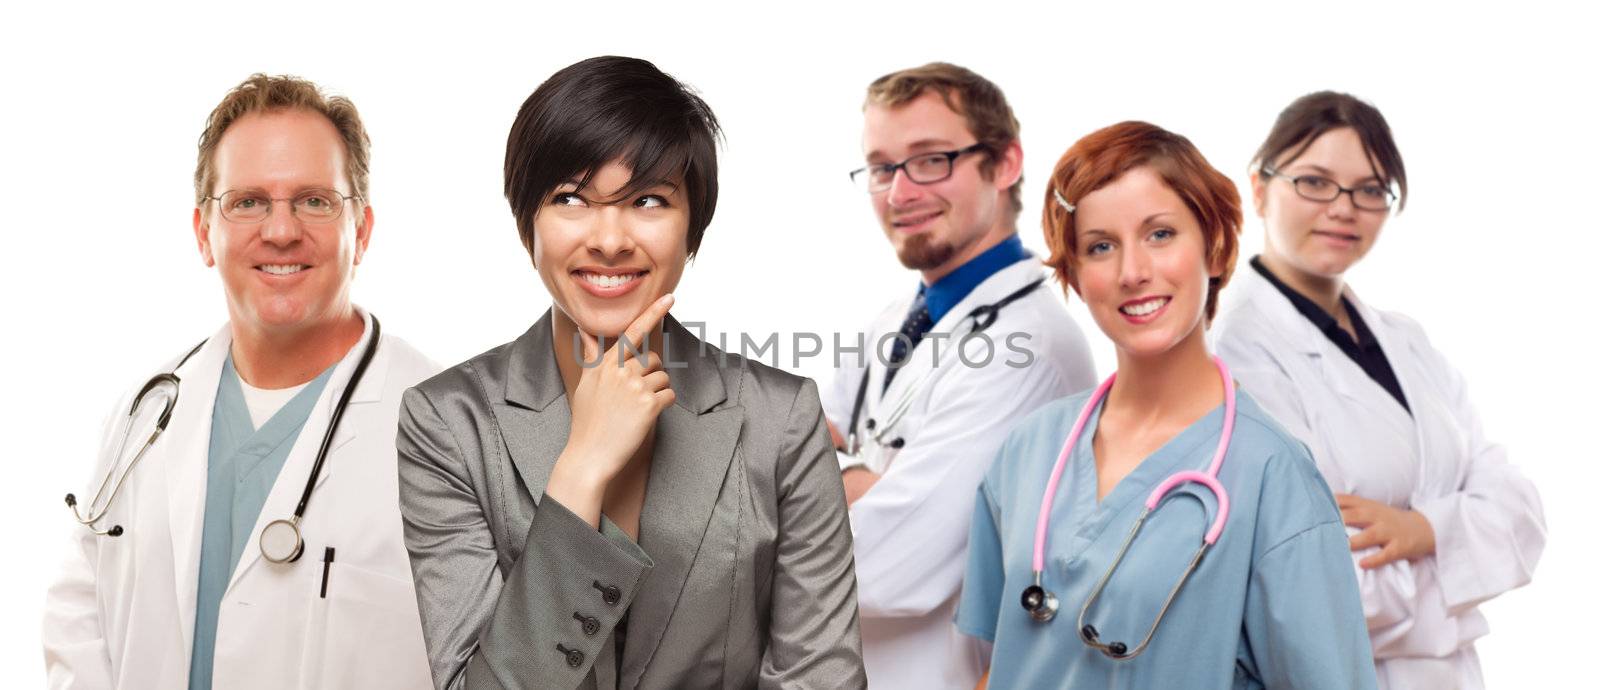 Young Mixed Race Woman with Doctors and Nurses Behind Isolated on a White Background.